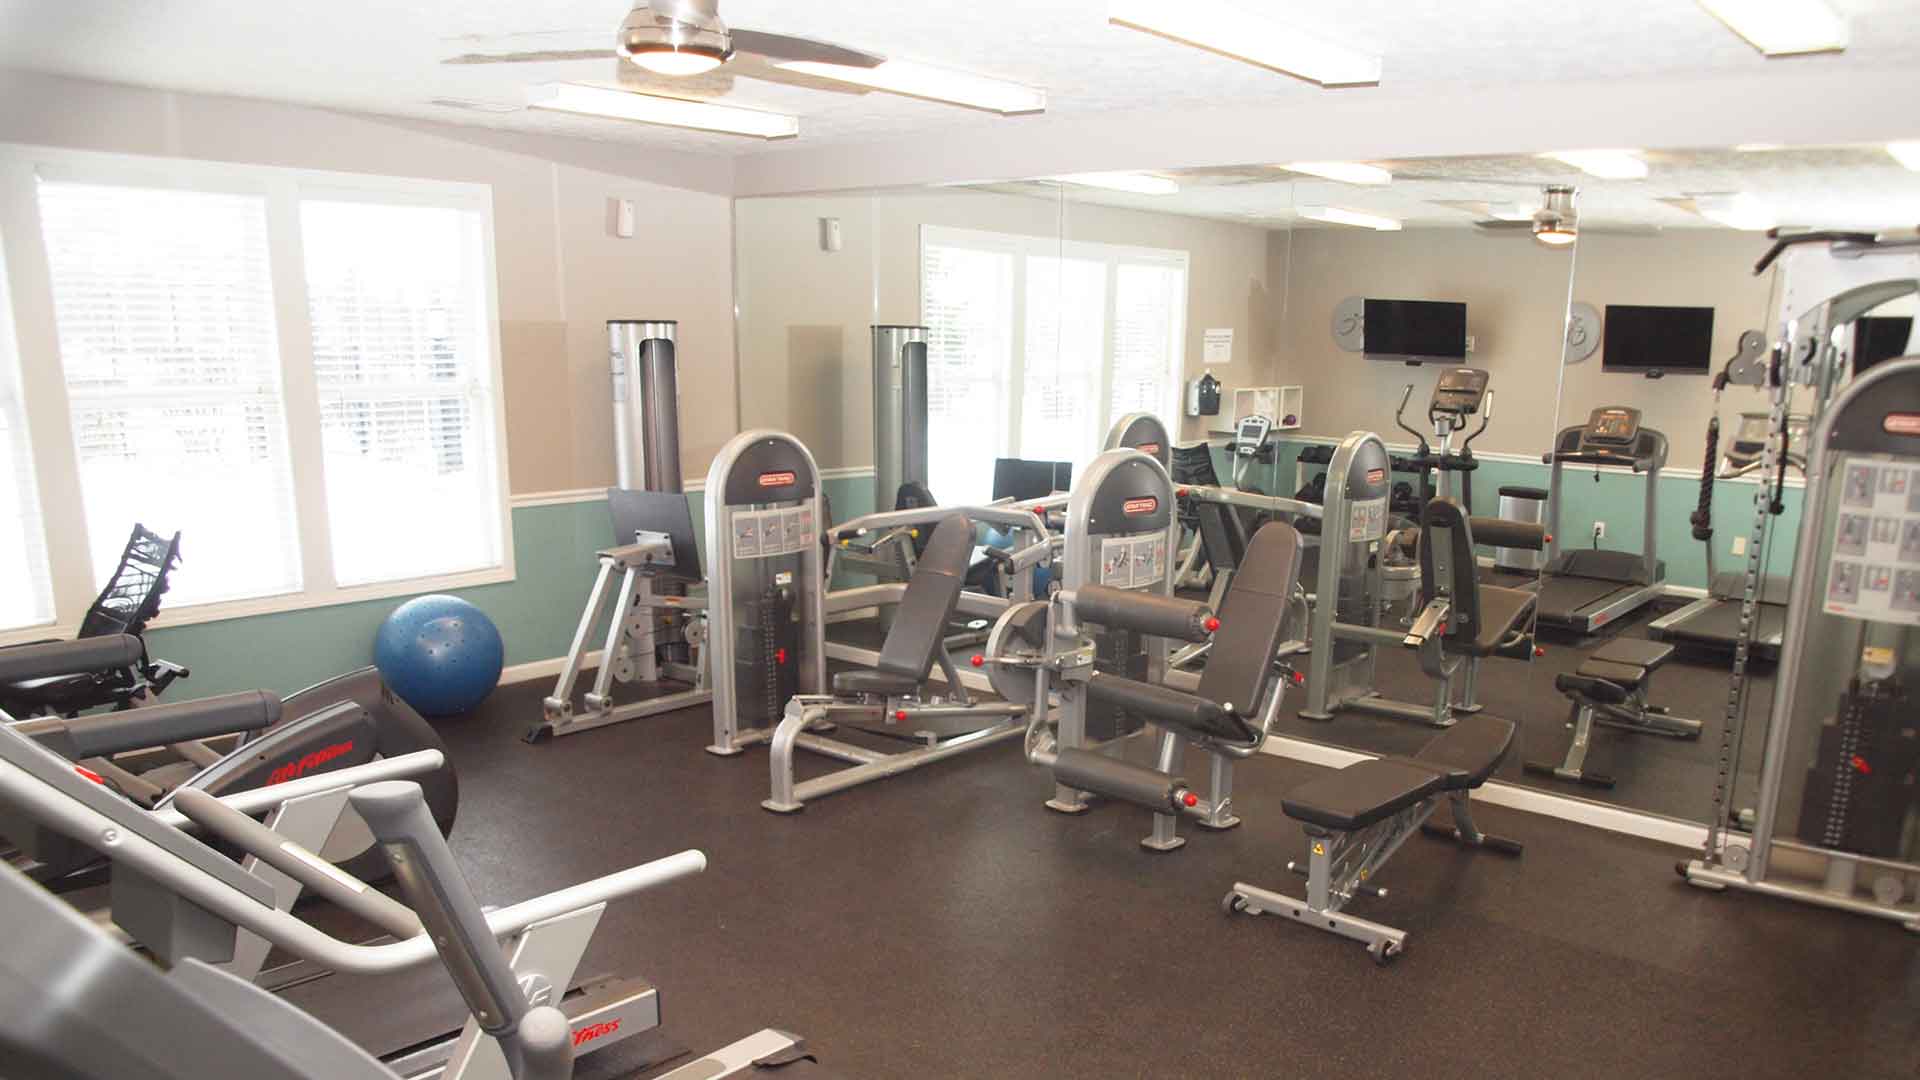 Fitness center with exercise machines at Landings at Beckett Ridge.